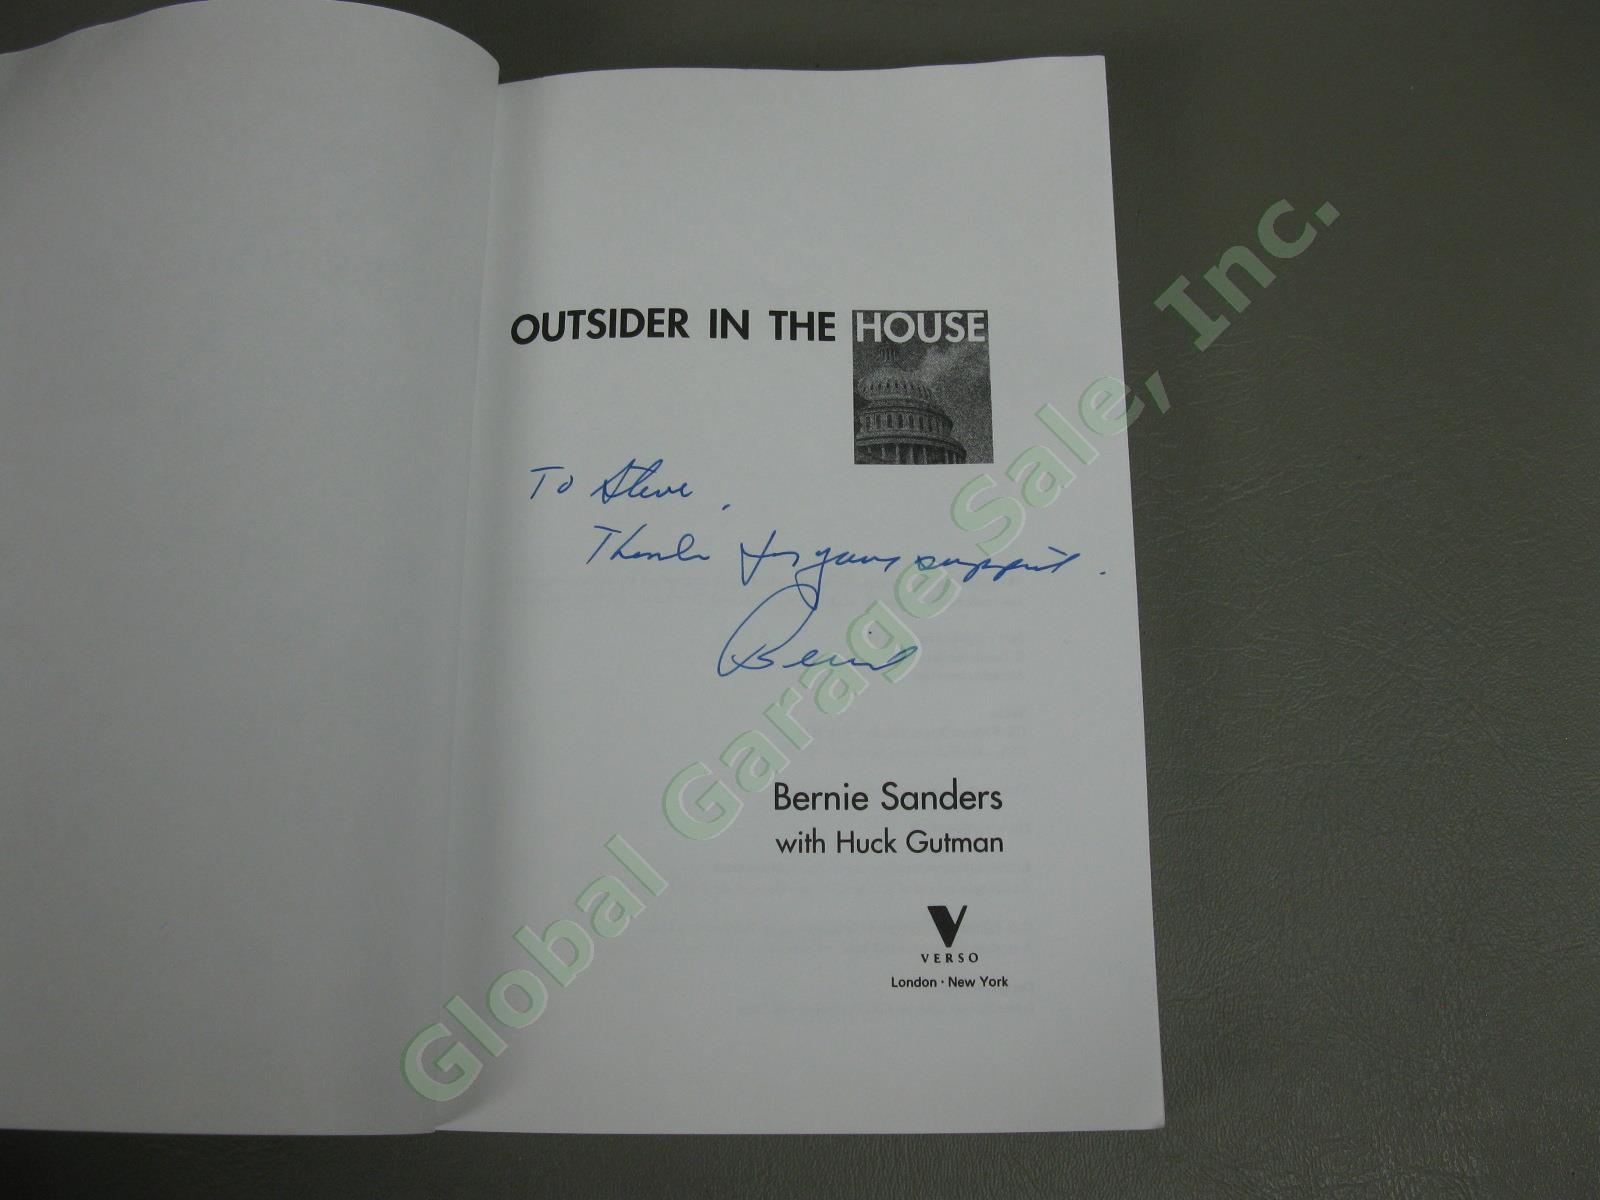 Bernie Sanders Hand Signed Autographed 1st Edition Book Outsider In The House NR 2